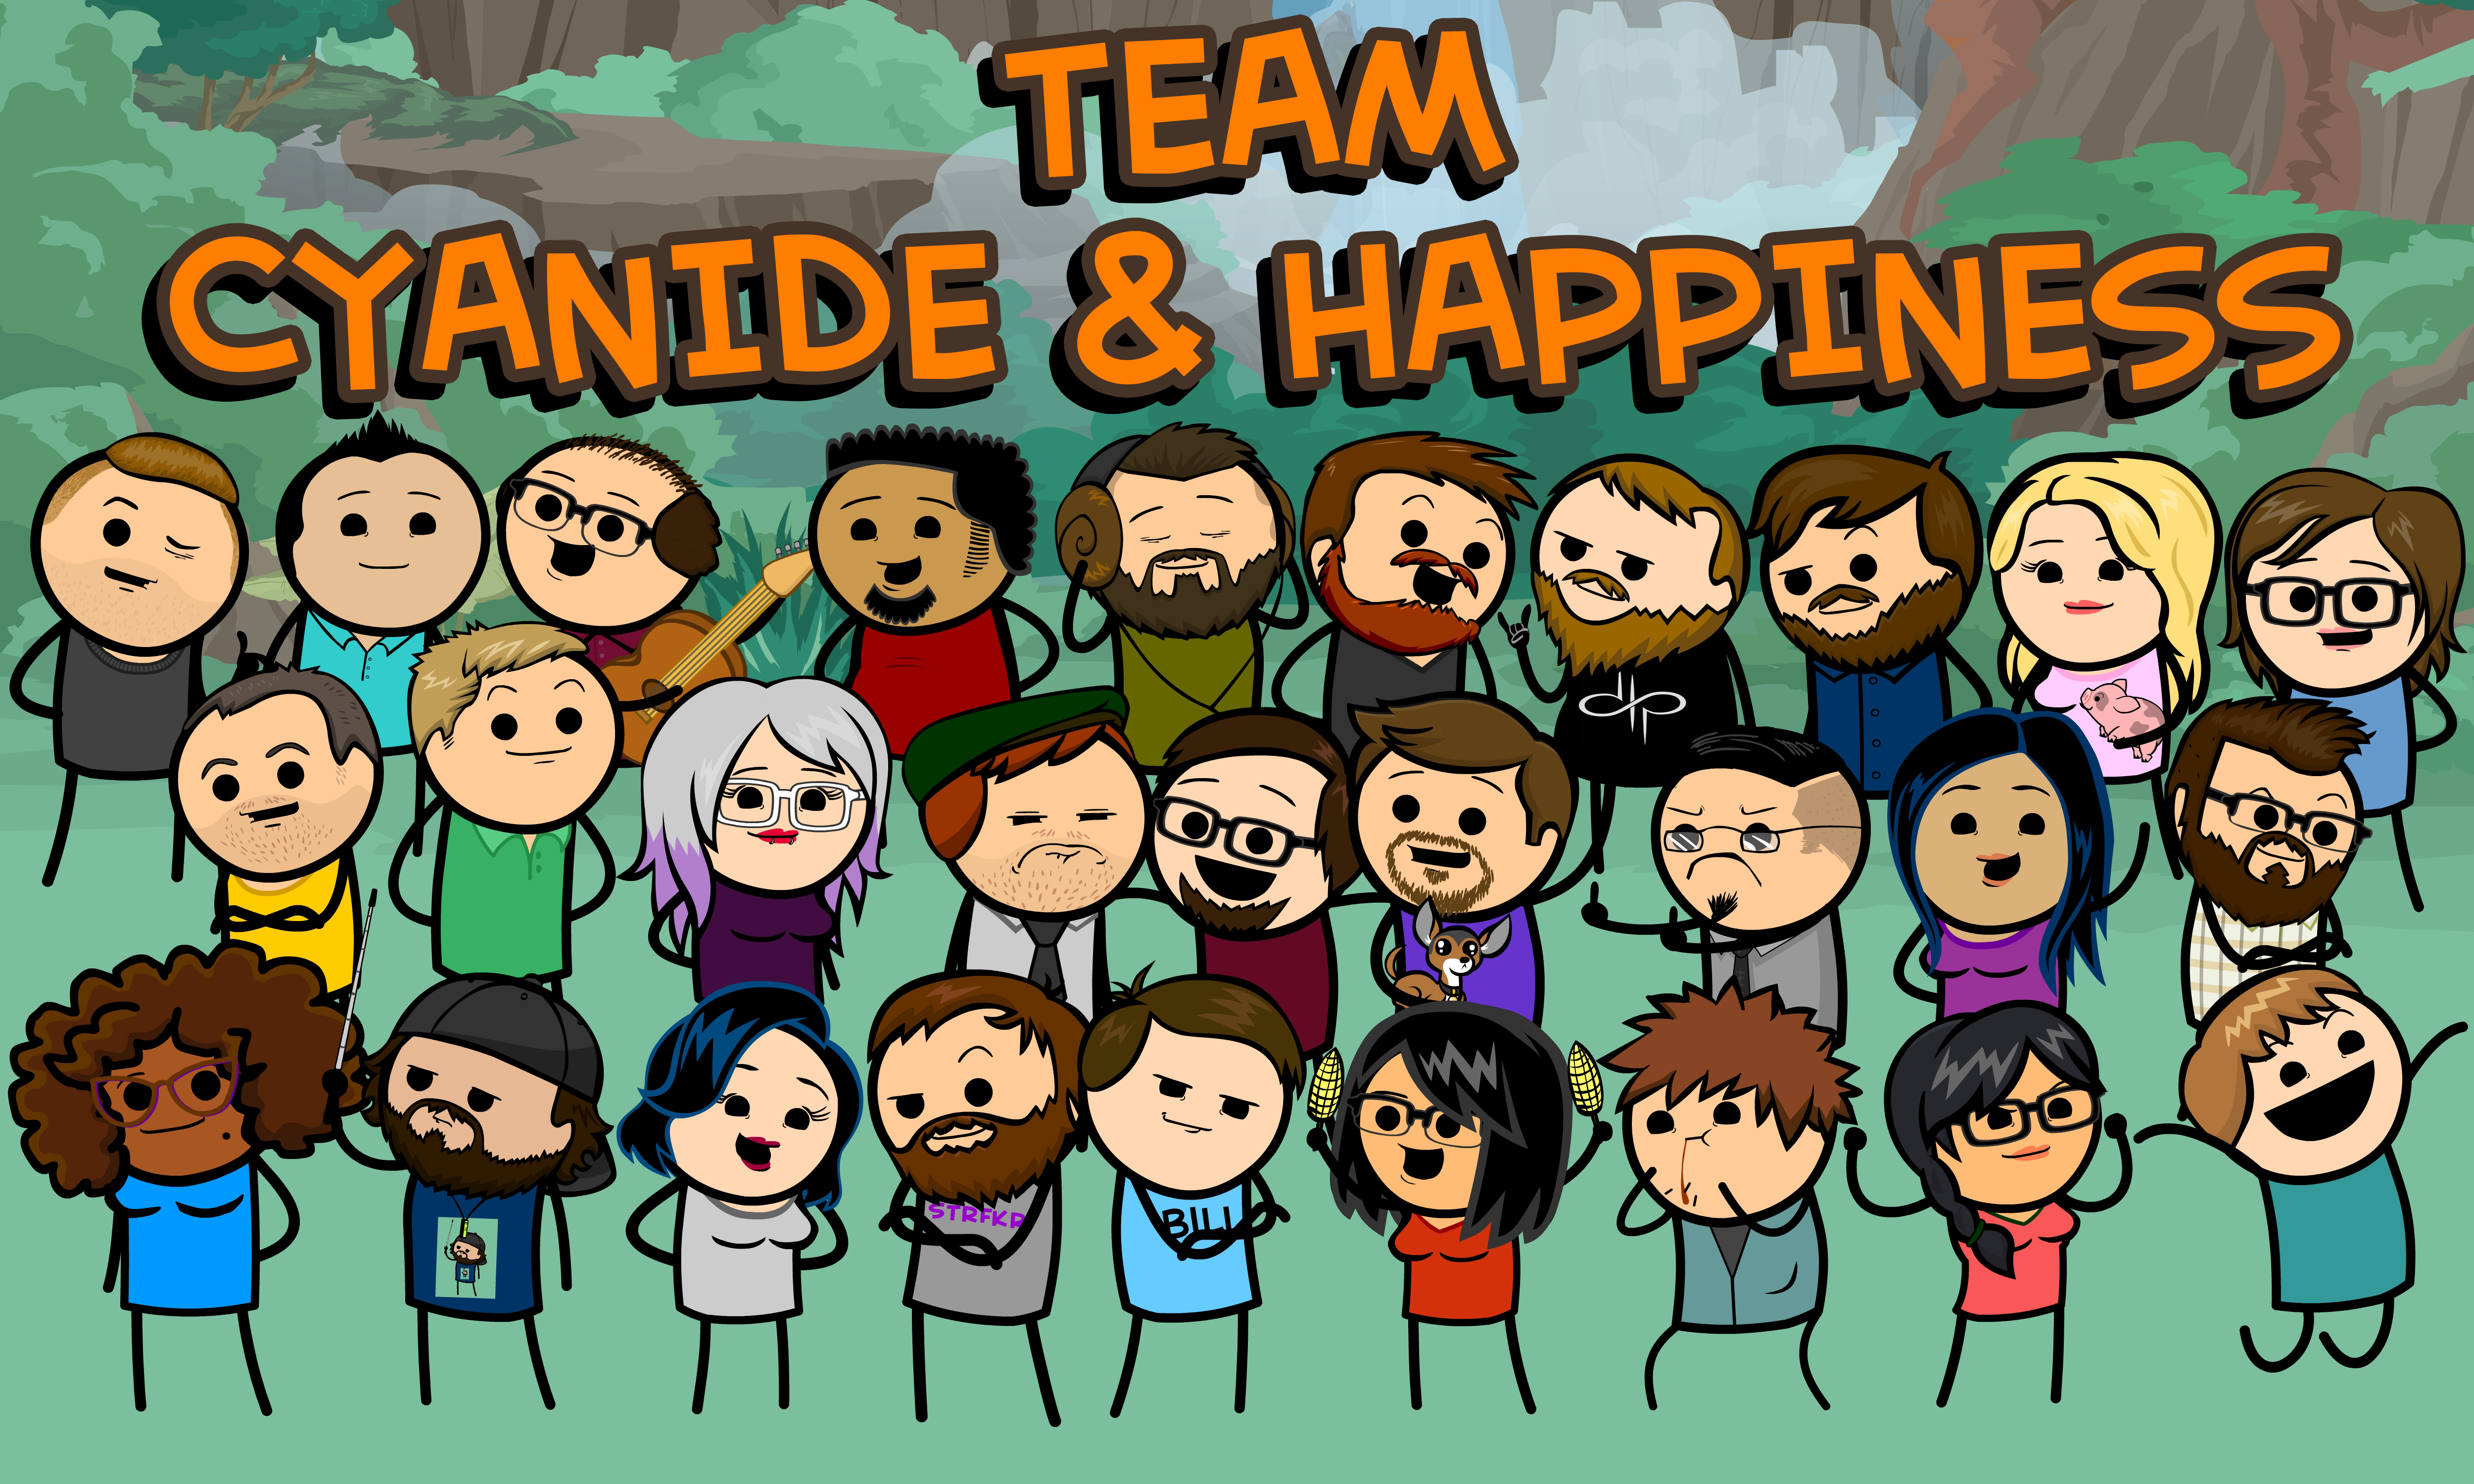 The Cyanide & Happiness Team!